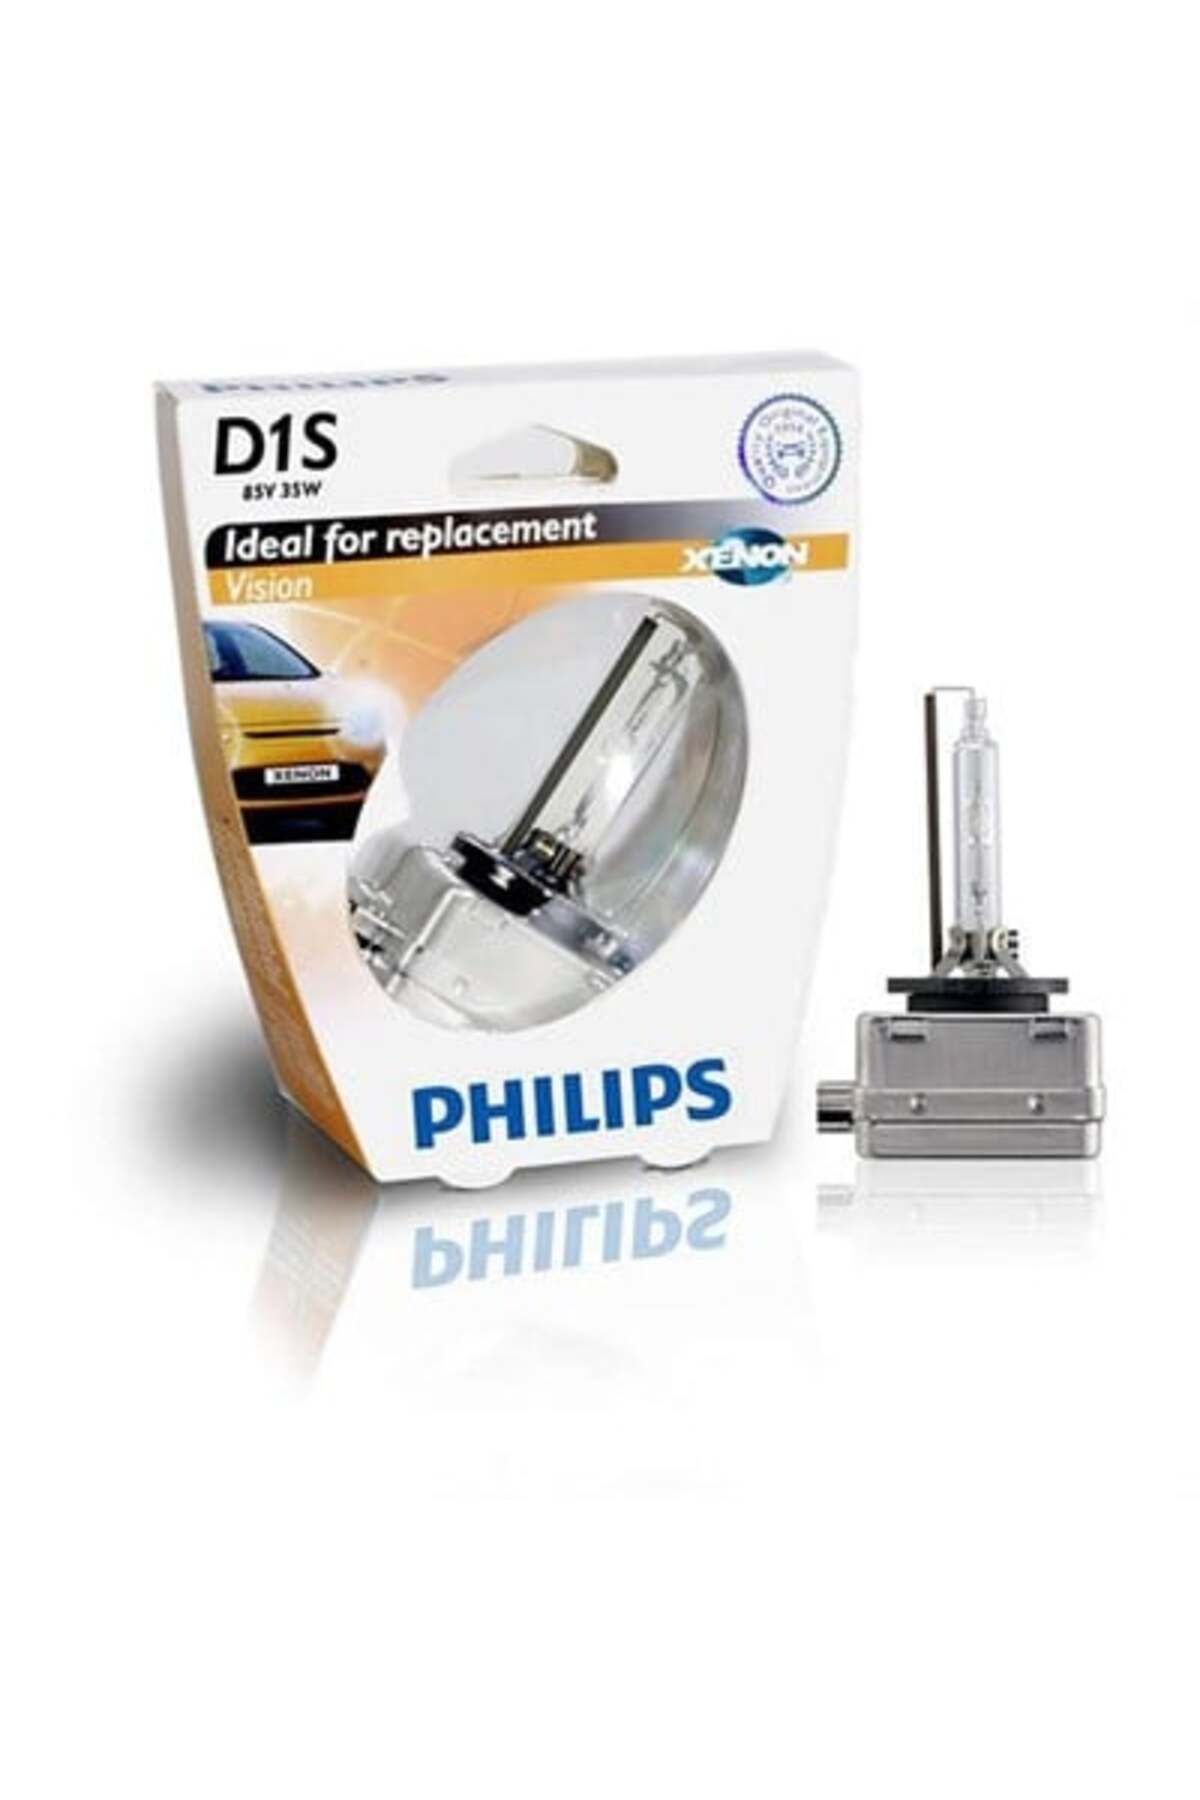 Philips D1s Vision 4600k 85v 35w Ampul Made In Germany